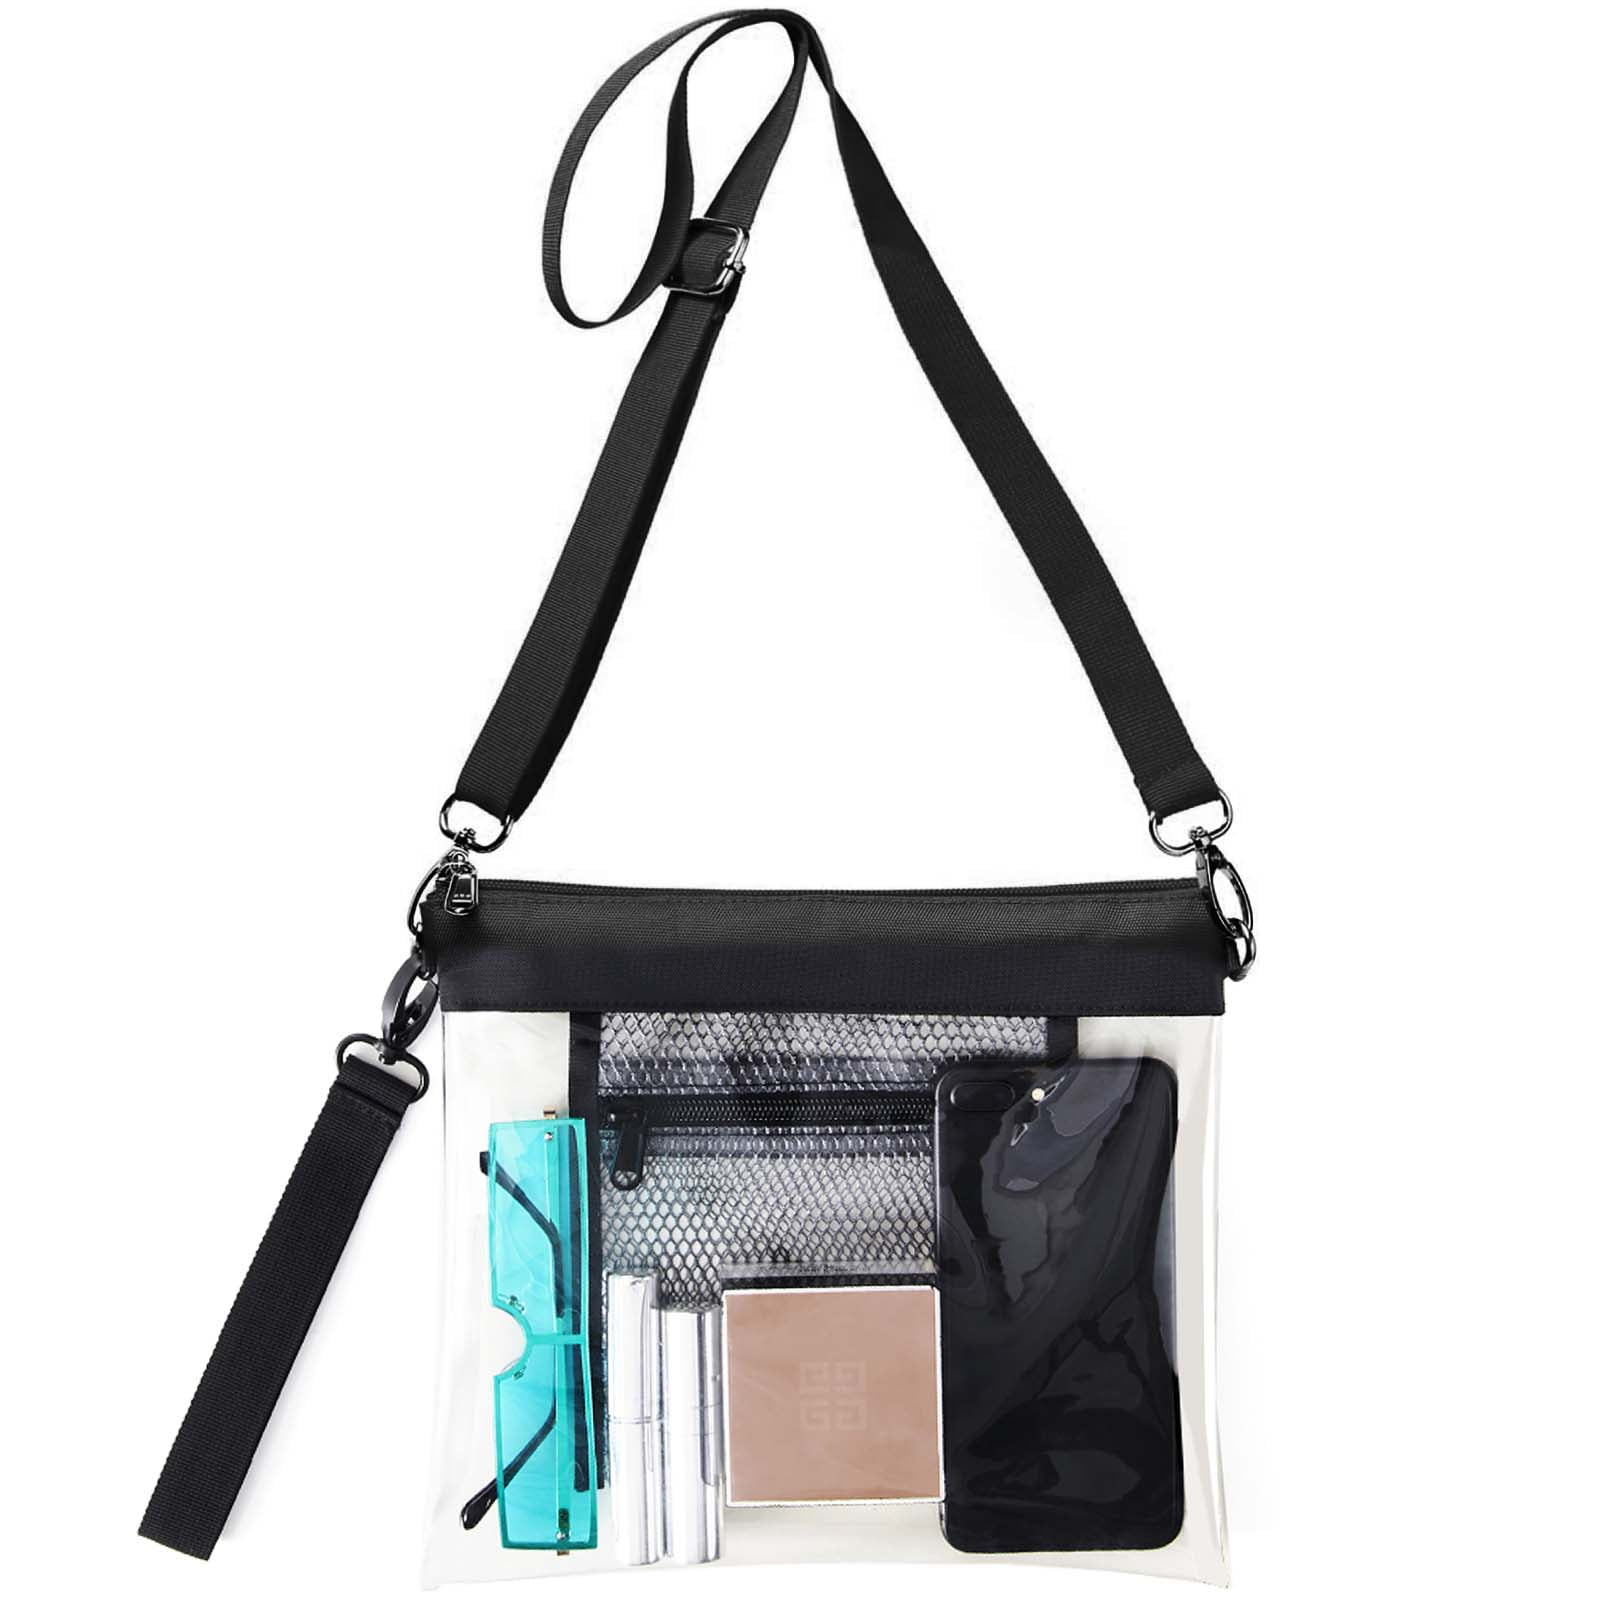 4 Pieces Clear Crossbody Purse Bag with Inner Pocket Clear Purse Bag Stadium Approved Adjustable Crossbody Handbags Transparent Tote Bag for Men Women Games Travel Concerts Sports Events 